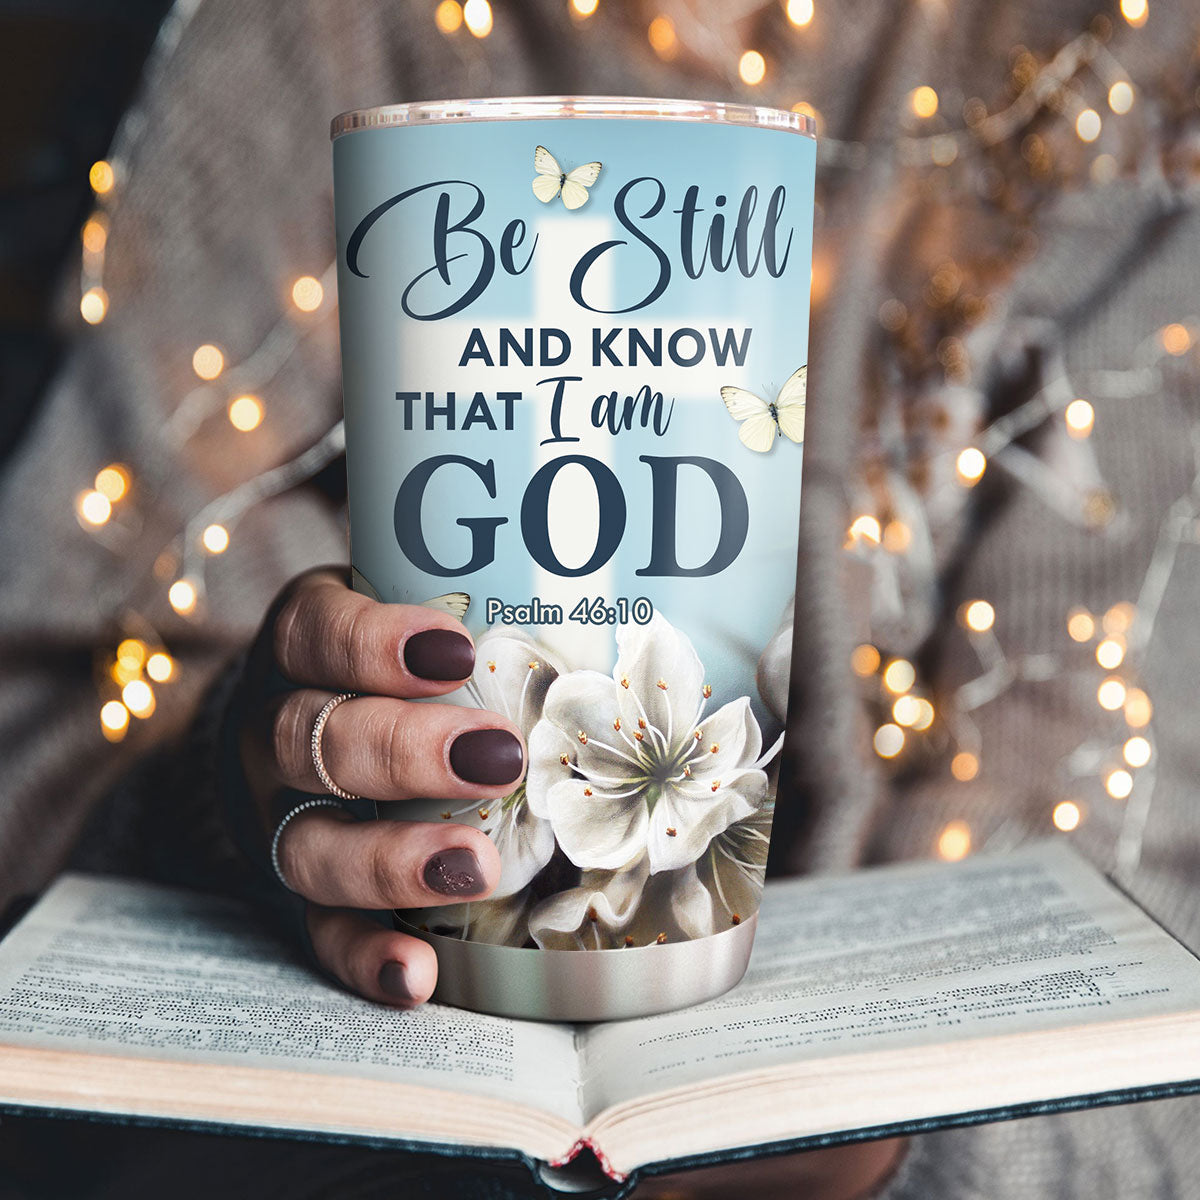 Be Still And Know That I Am God - Personalized Stainless Steel Tumbler 20oz NUHN362